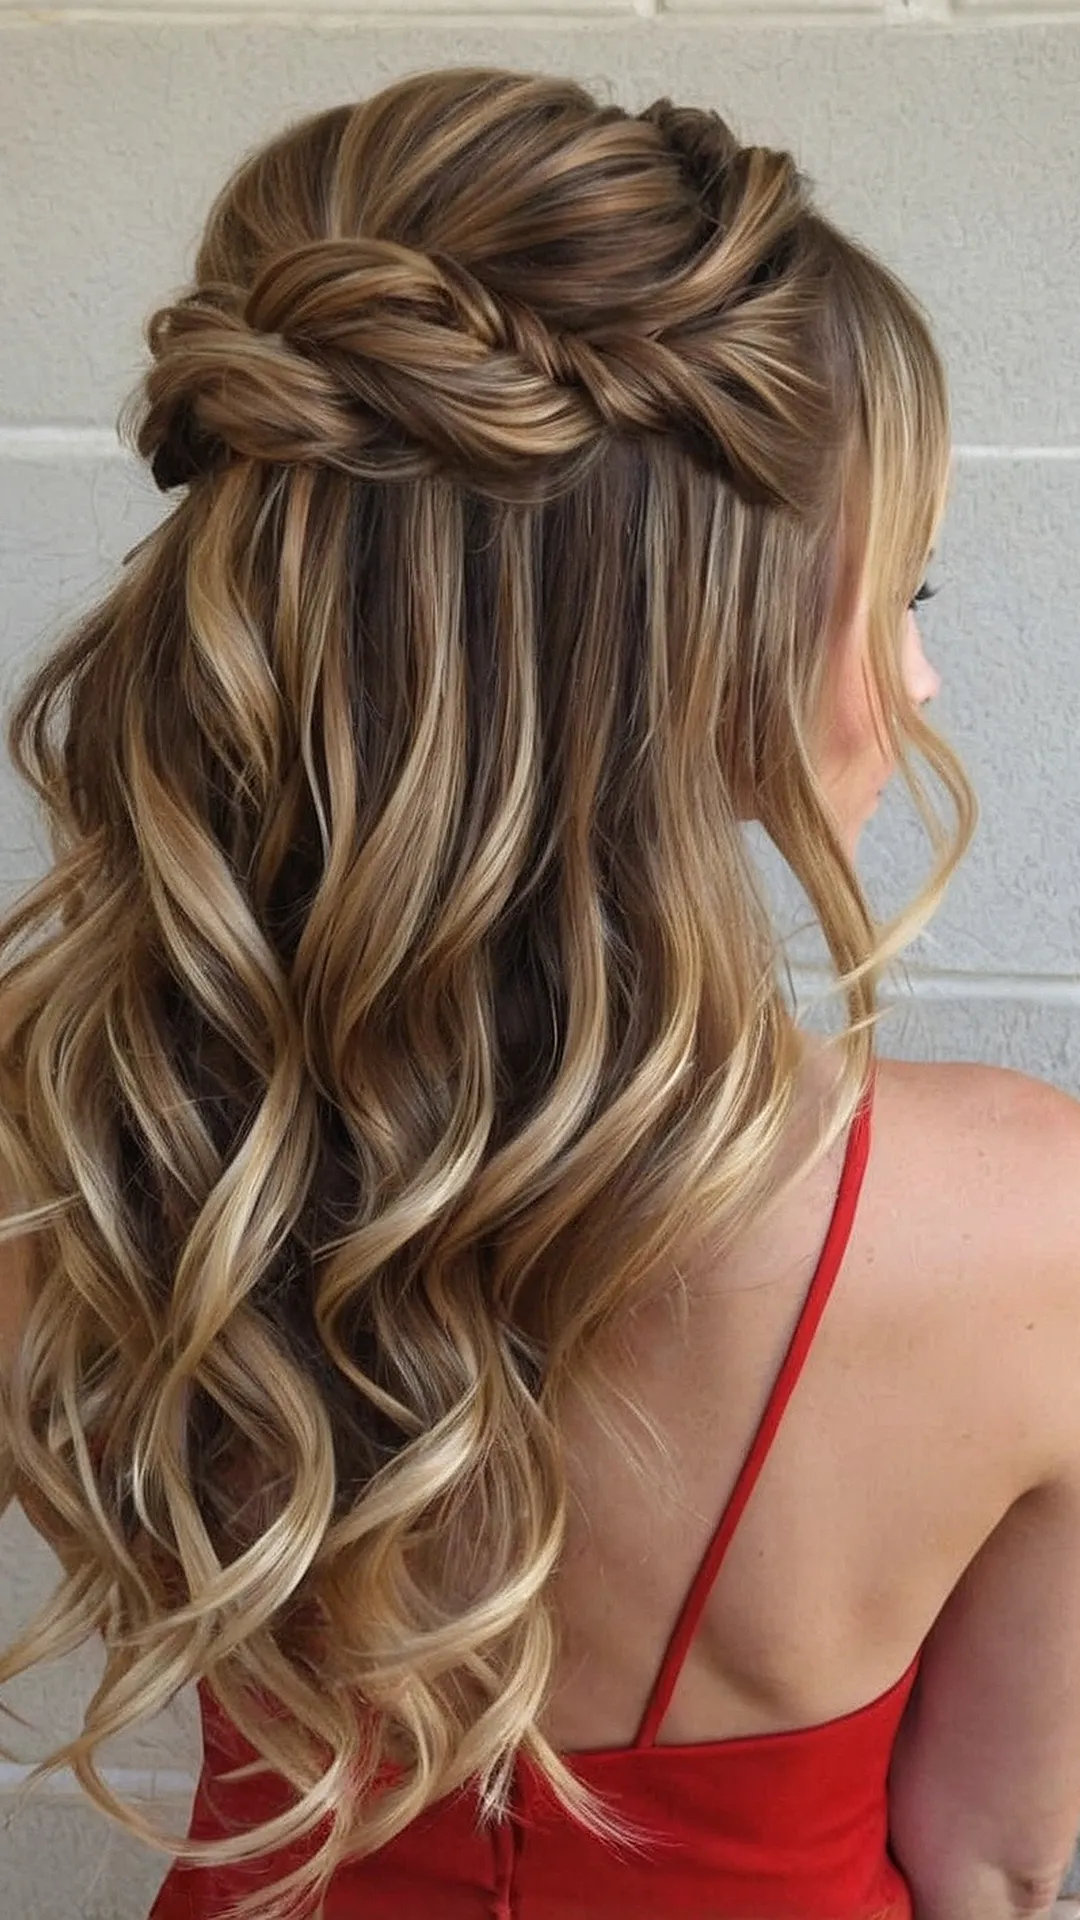 Playful Prom Bow Hairstyles